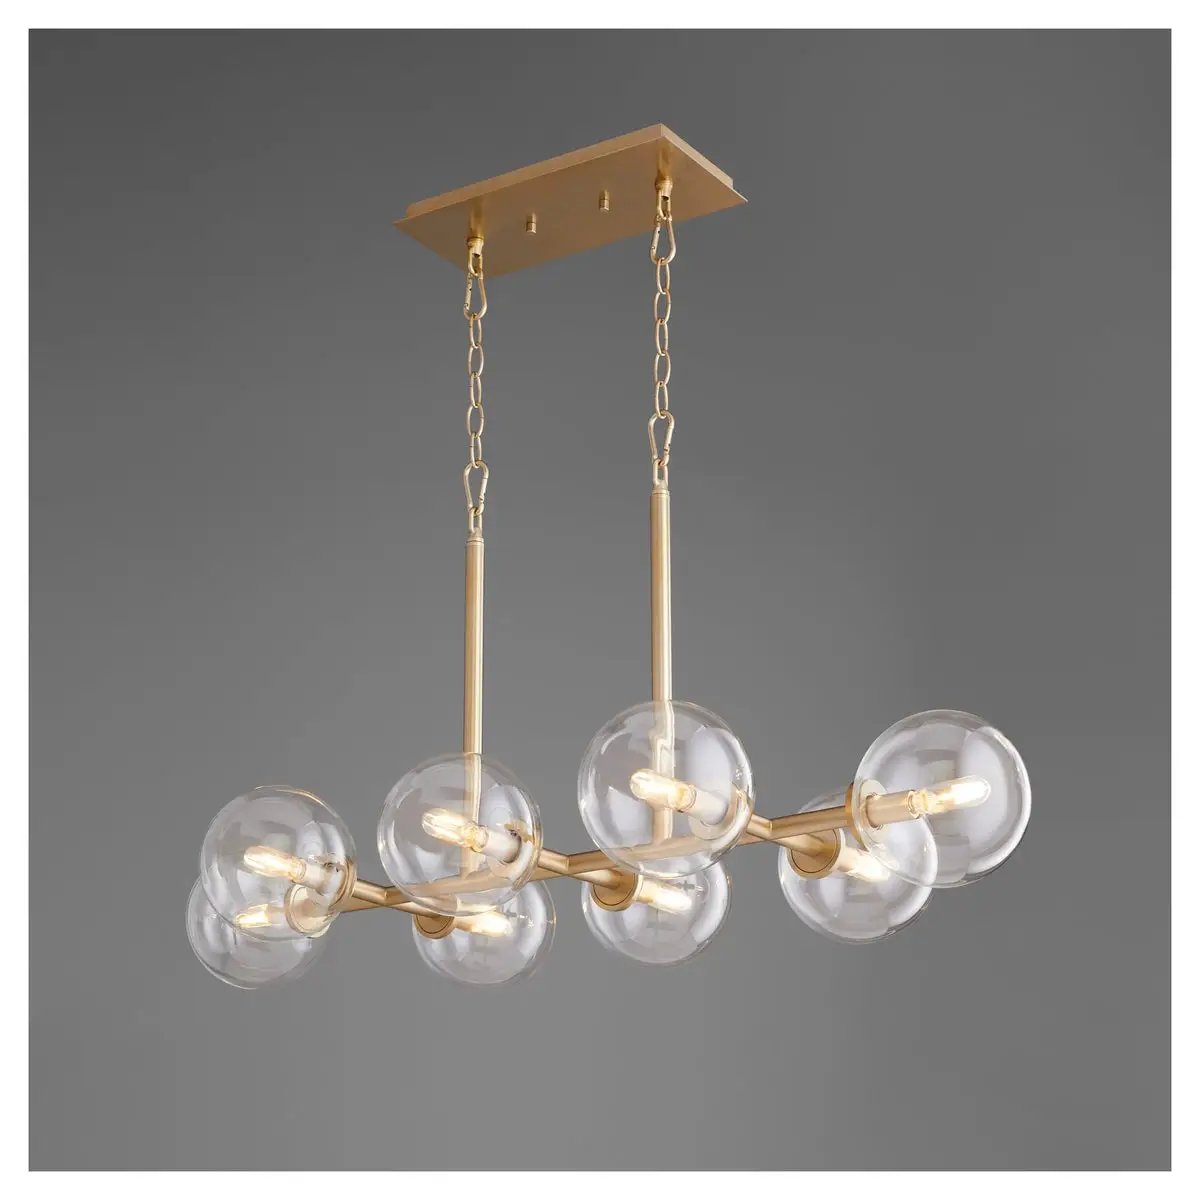 Linear Sputnik Chandelier with clear glass balls, aged brass frames, and mid-century modern appeal. Dramatic and charming lighting fixture for any environment. Wow your guests with this brilliant design.